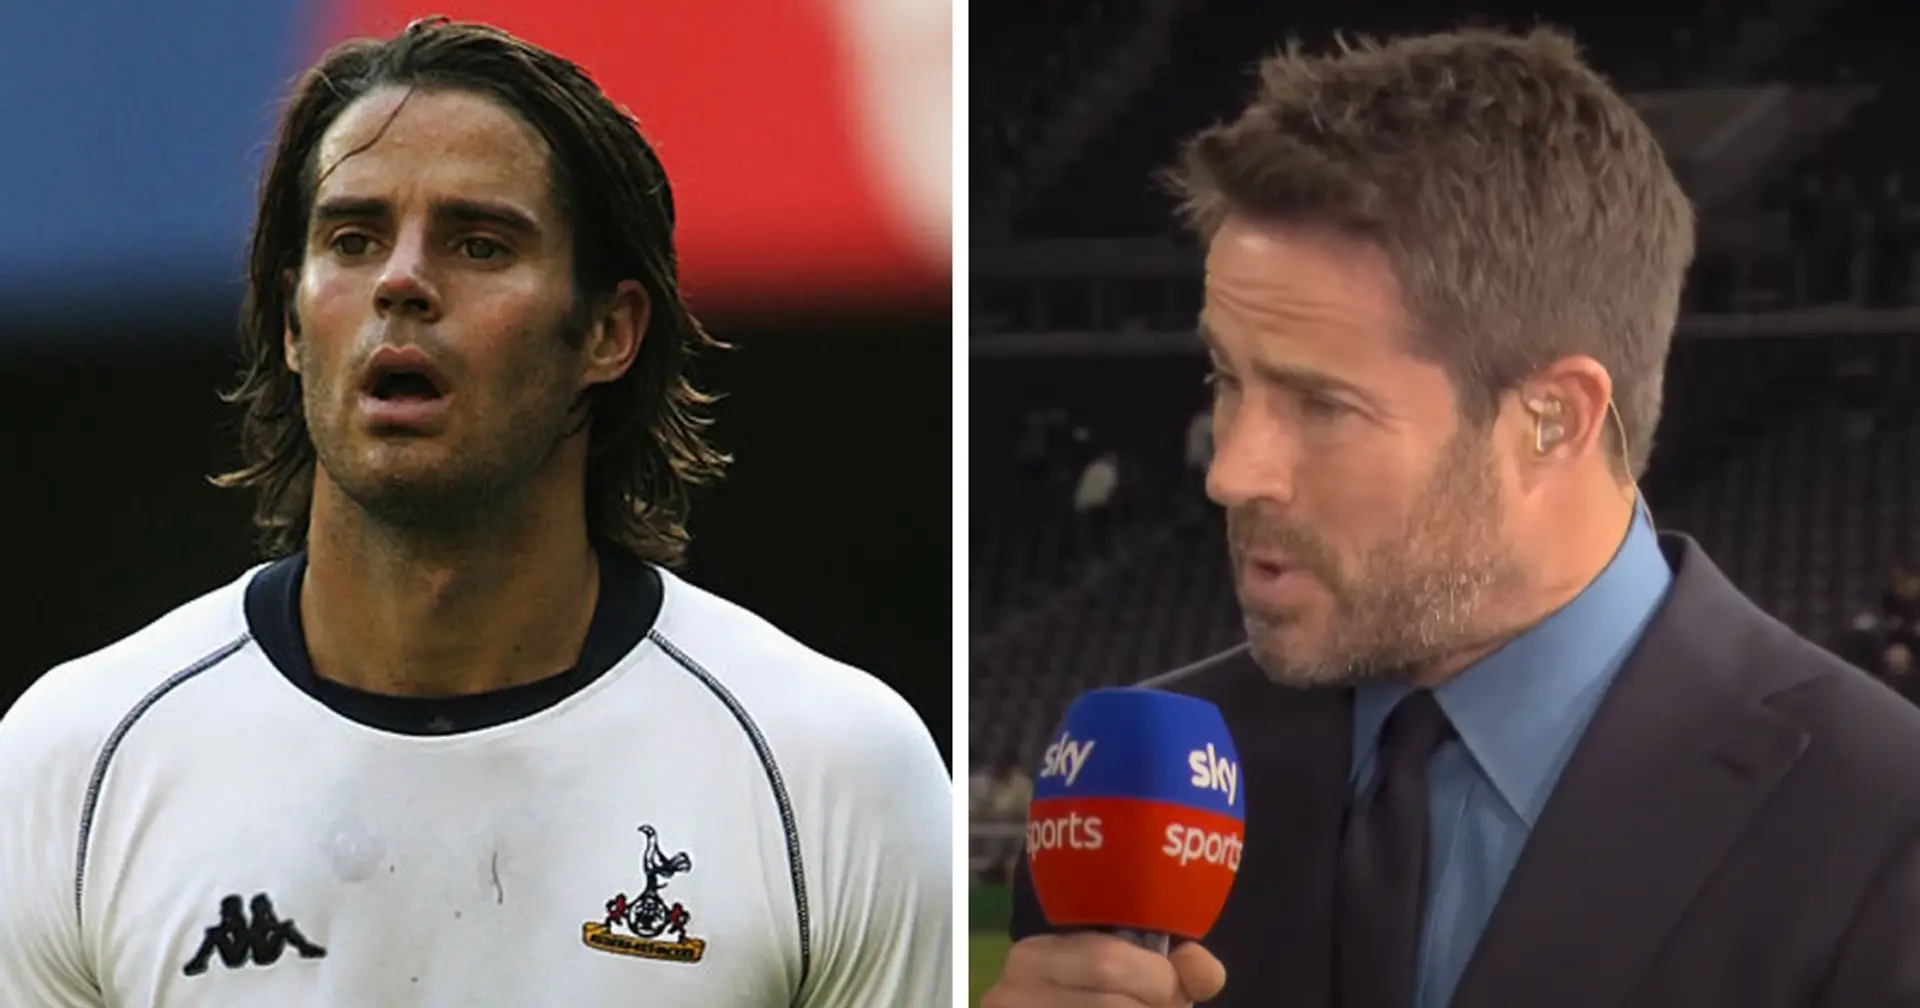 'I didn’t ever feel it was a winning mentality': Jamie Redknapp slams Spurs after Man City defeat